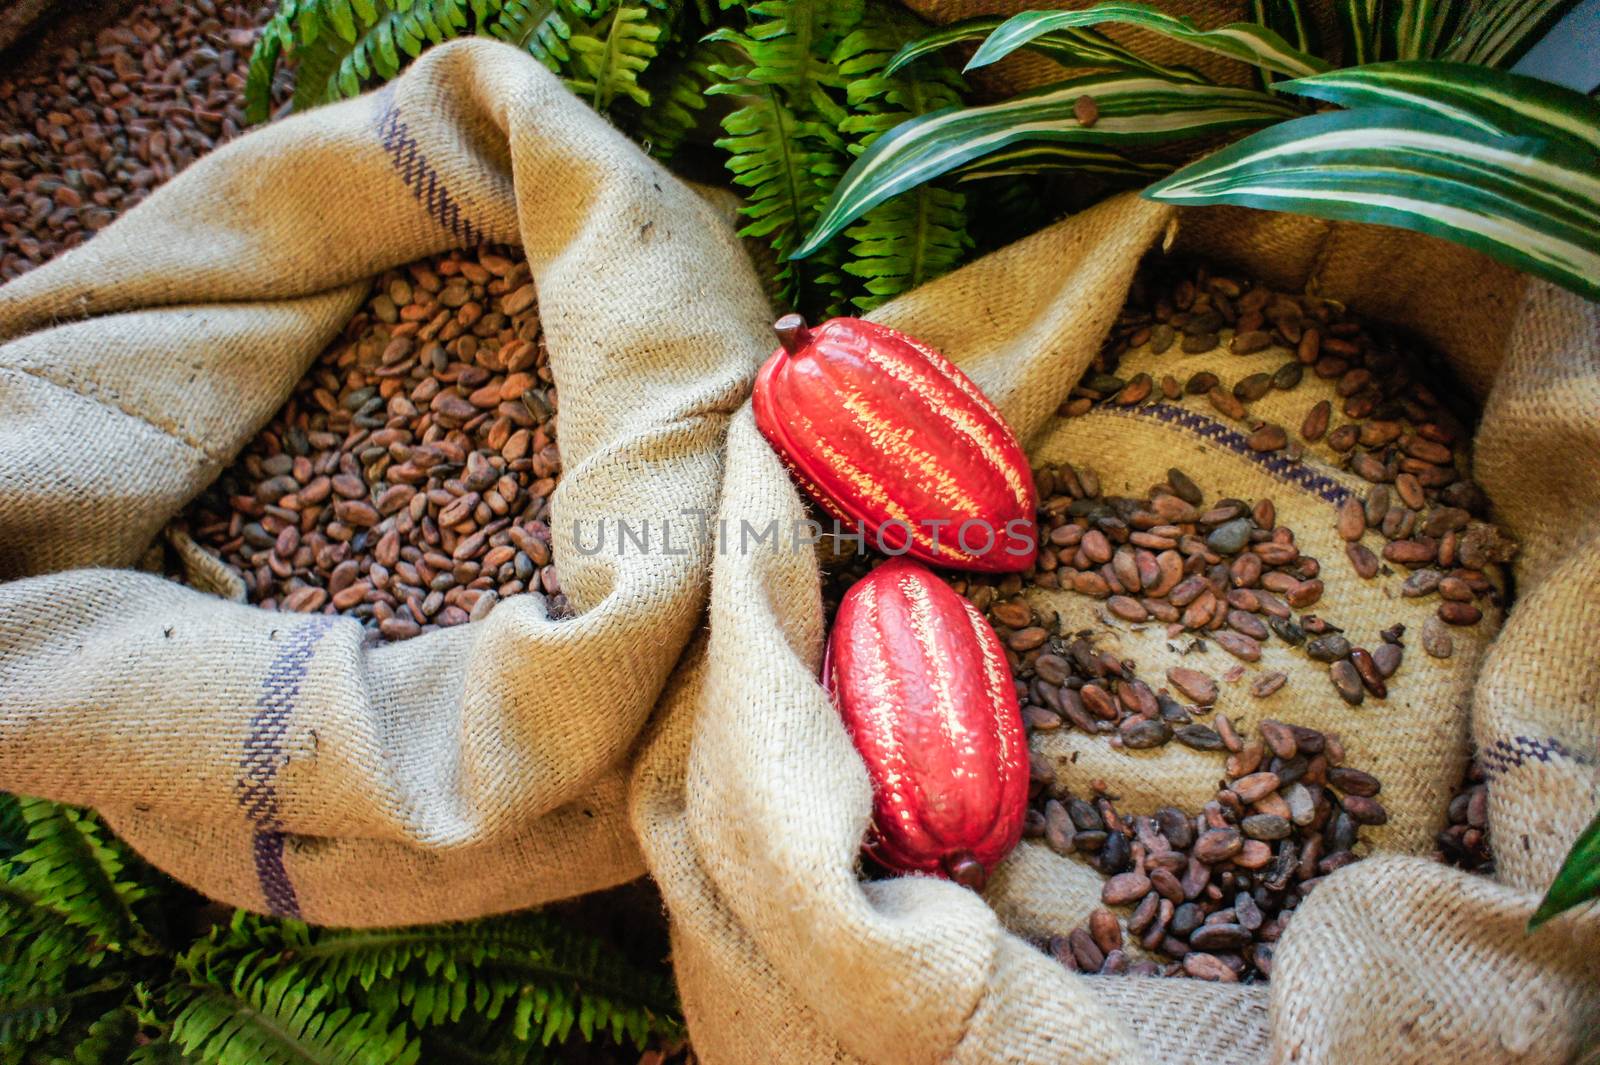 Jute bag with cocoa beans and cocoa Fruits